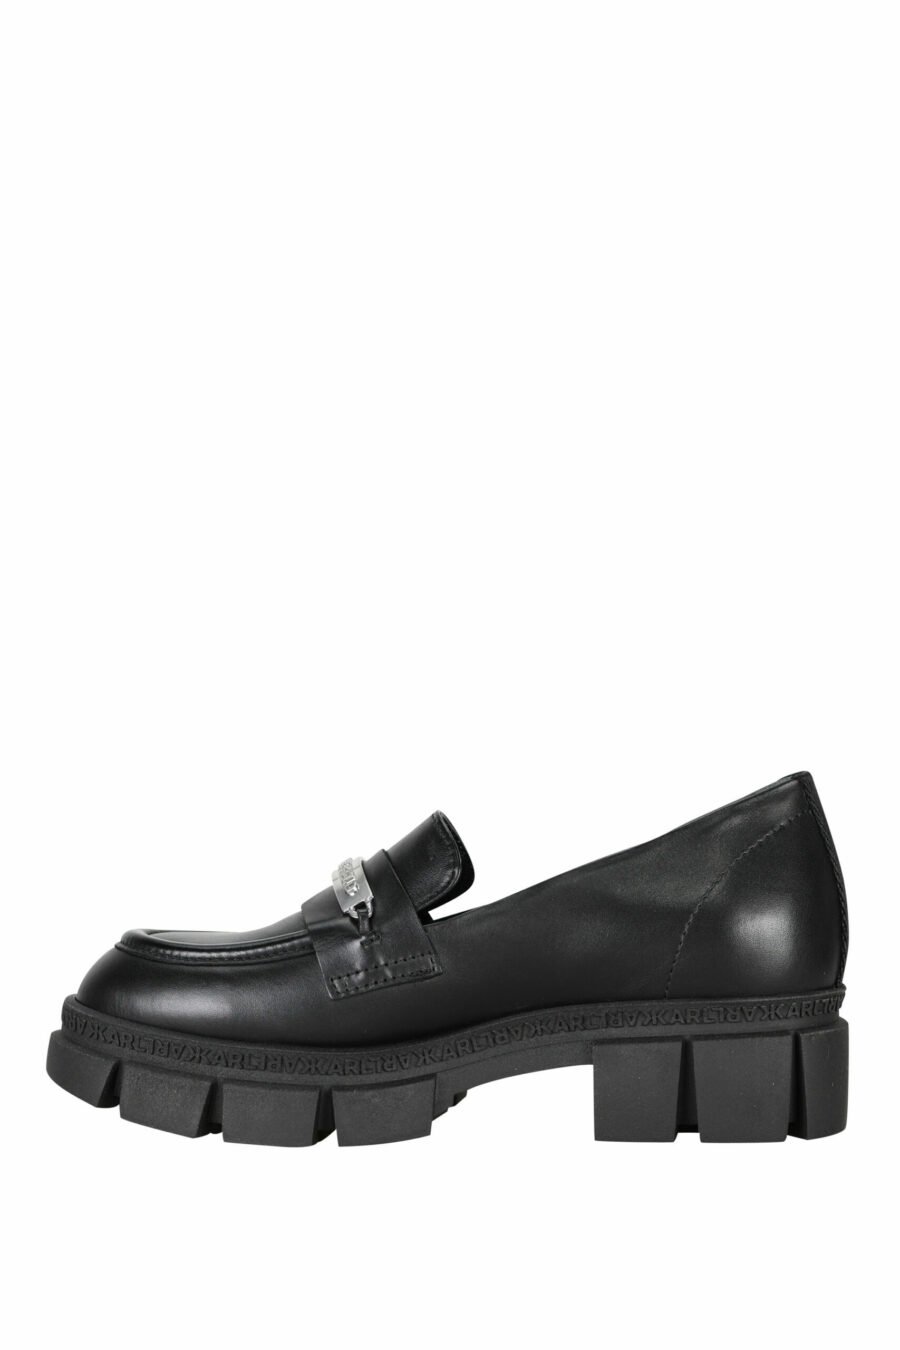 Black loafers with mini-logo and platform - 5059529284977 2 scaled